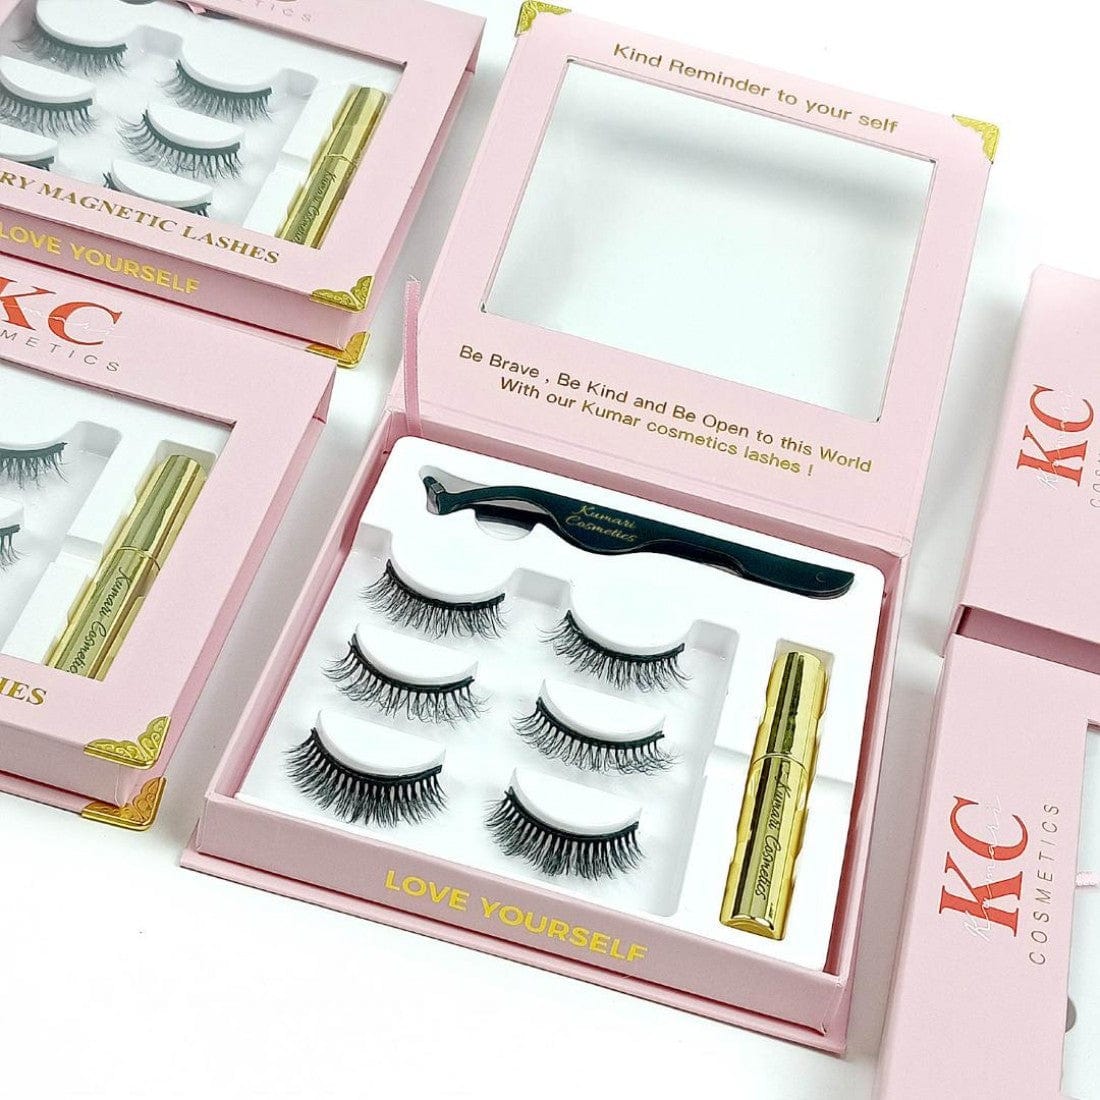 Luxury Magnetic Faux Mink Lashes "Love Yourself"